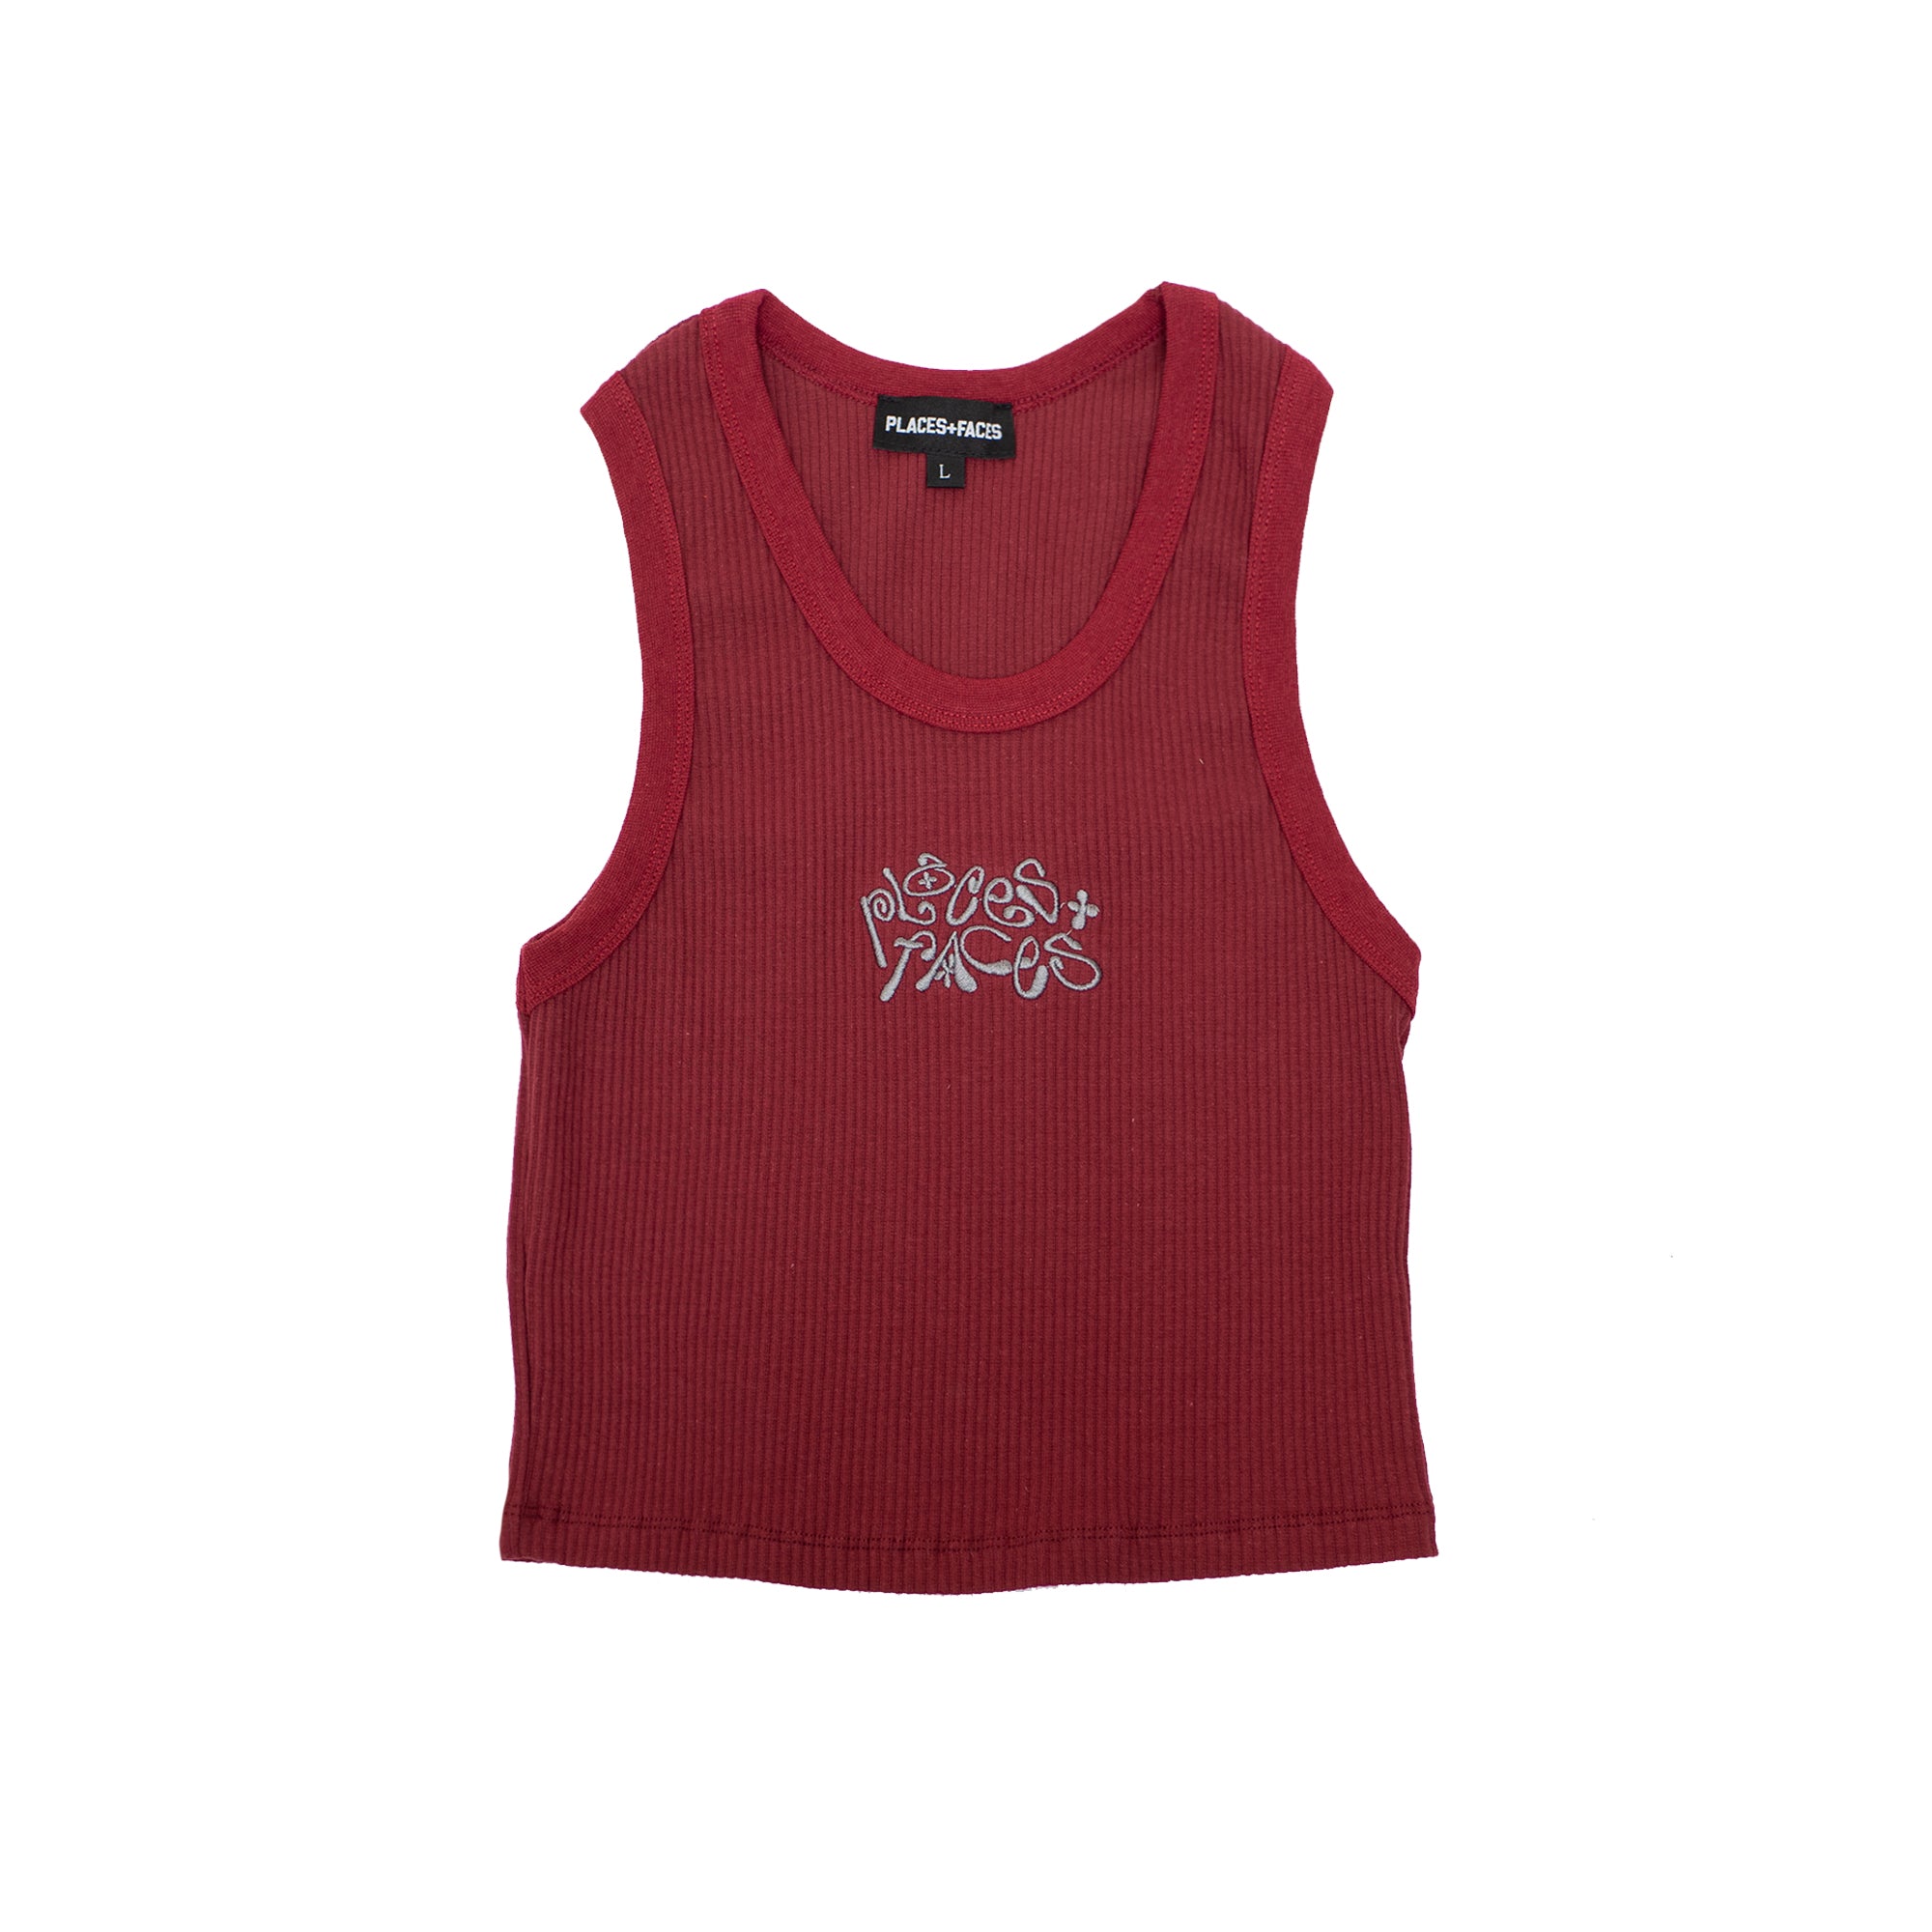 CURLY LOGO CROPPED TANK - RED